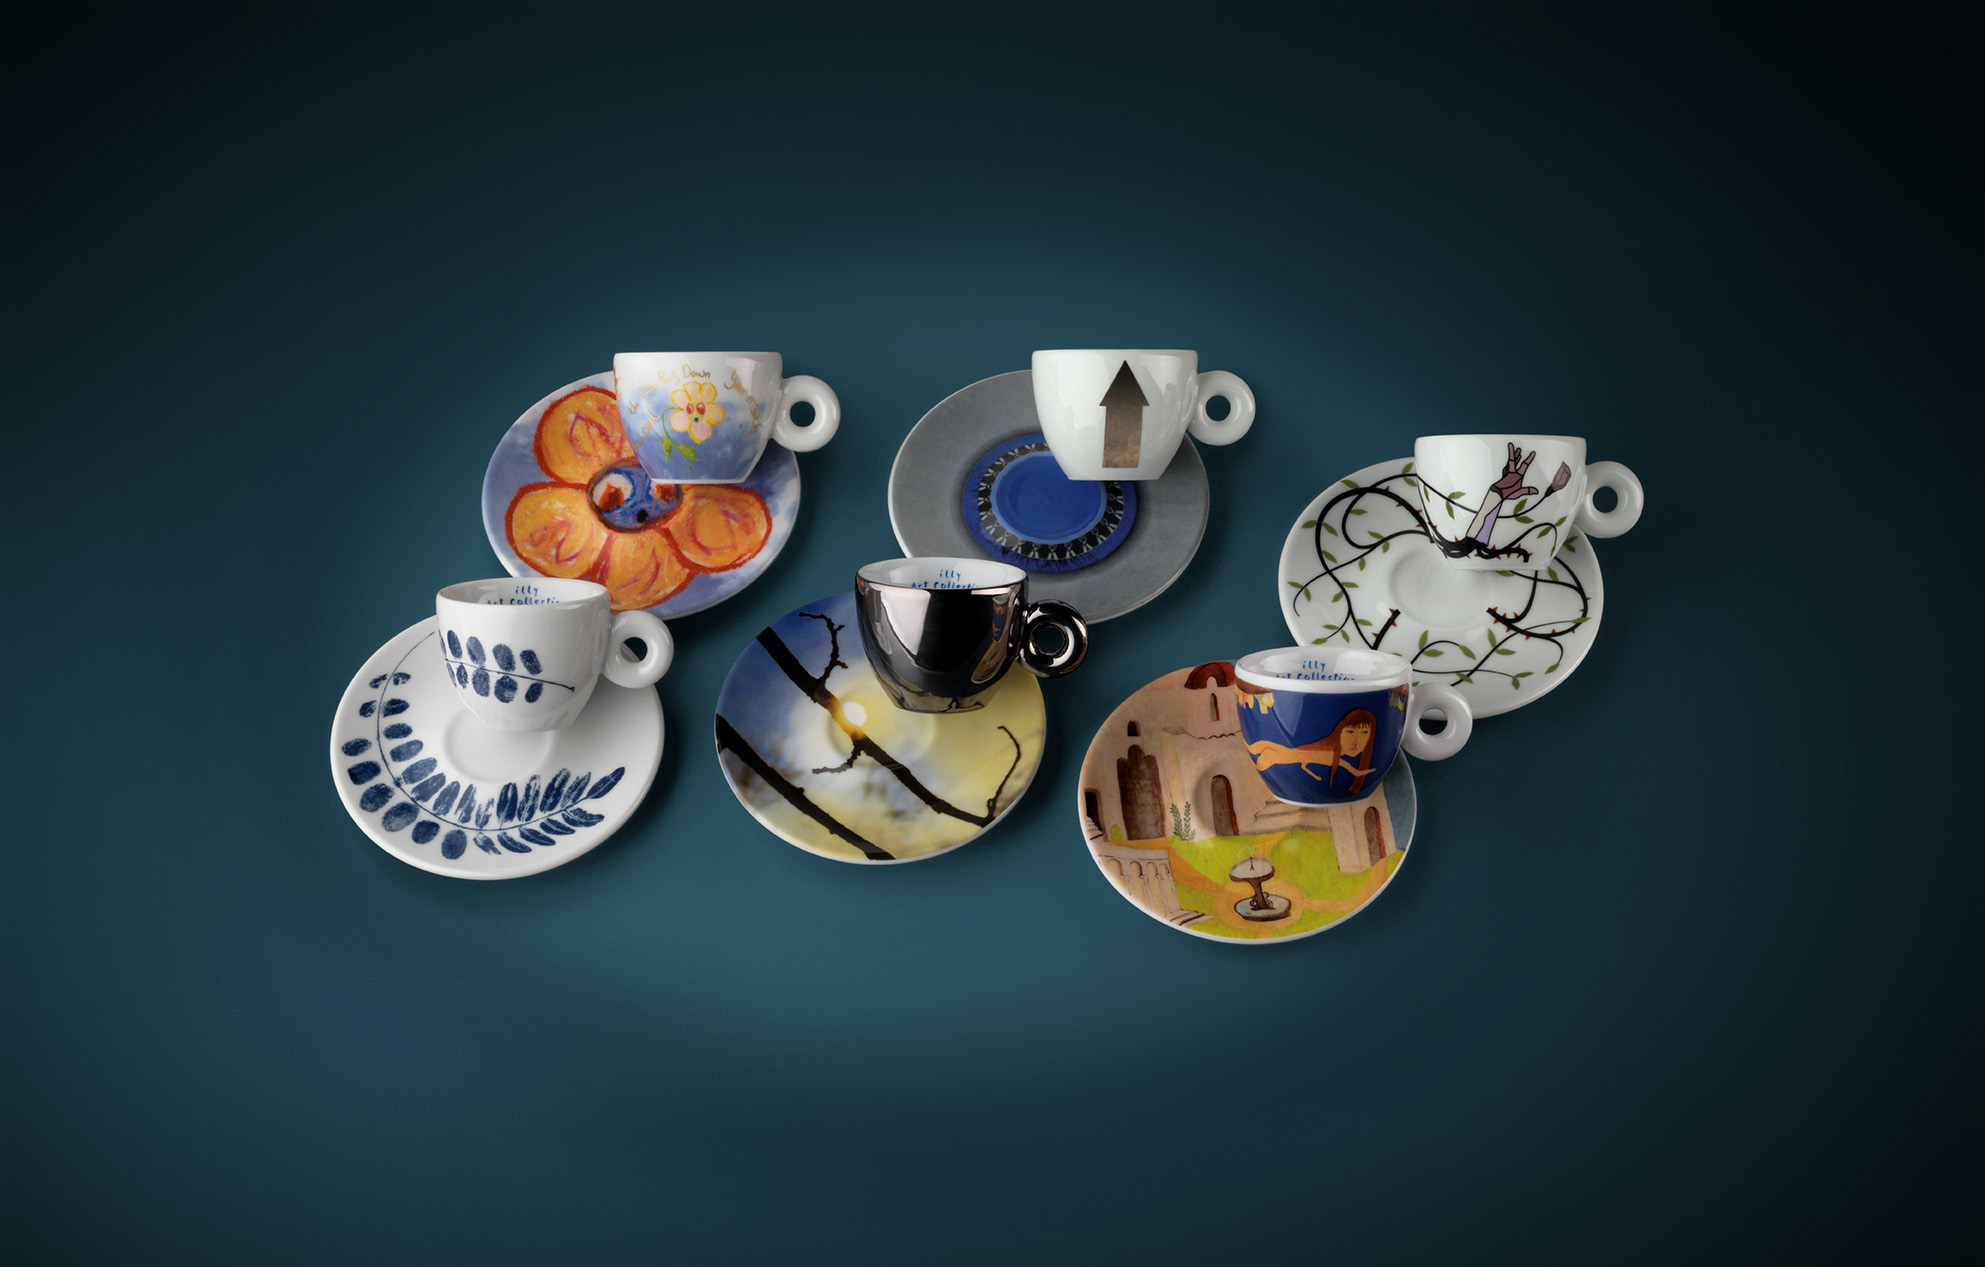 illy “Biennale Art” collection